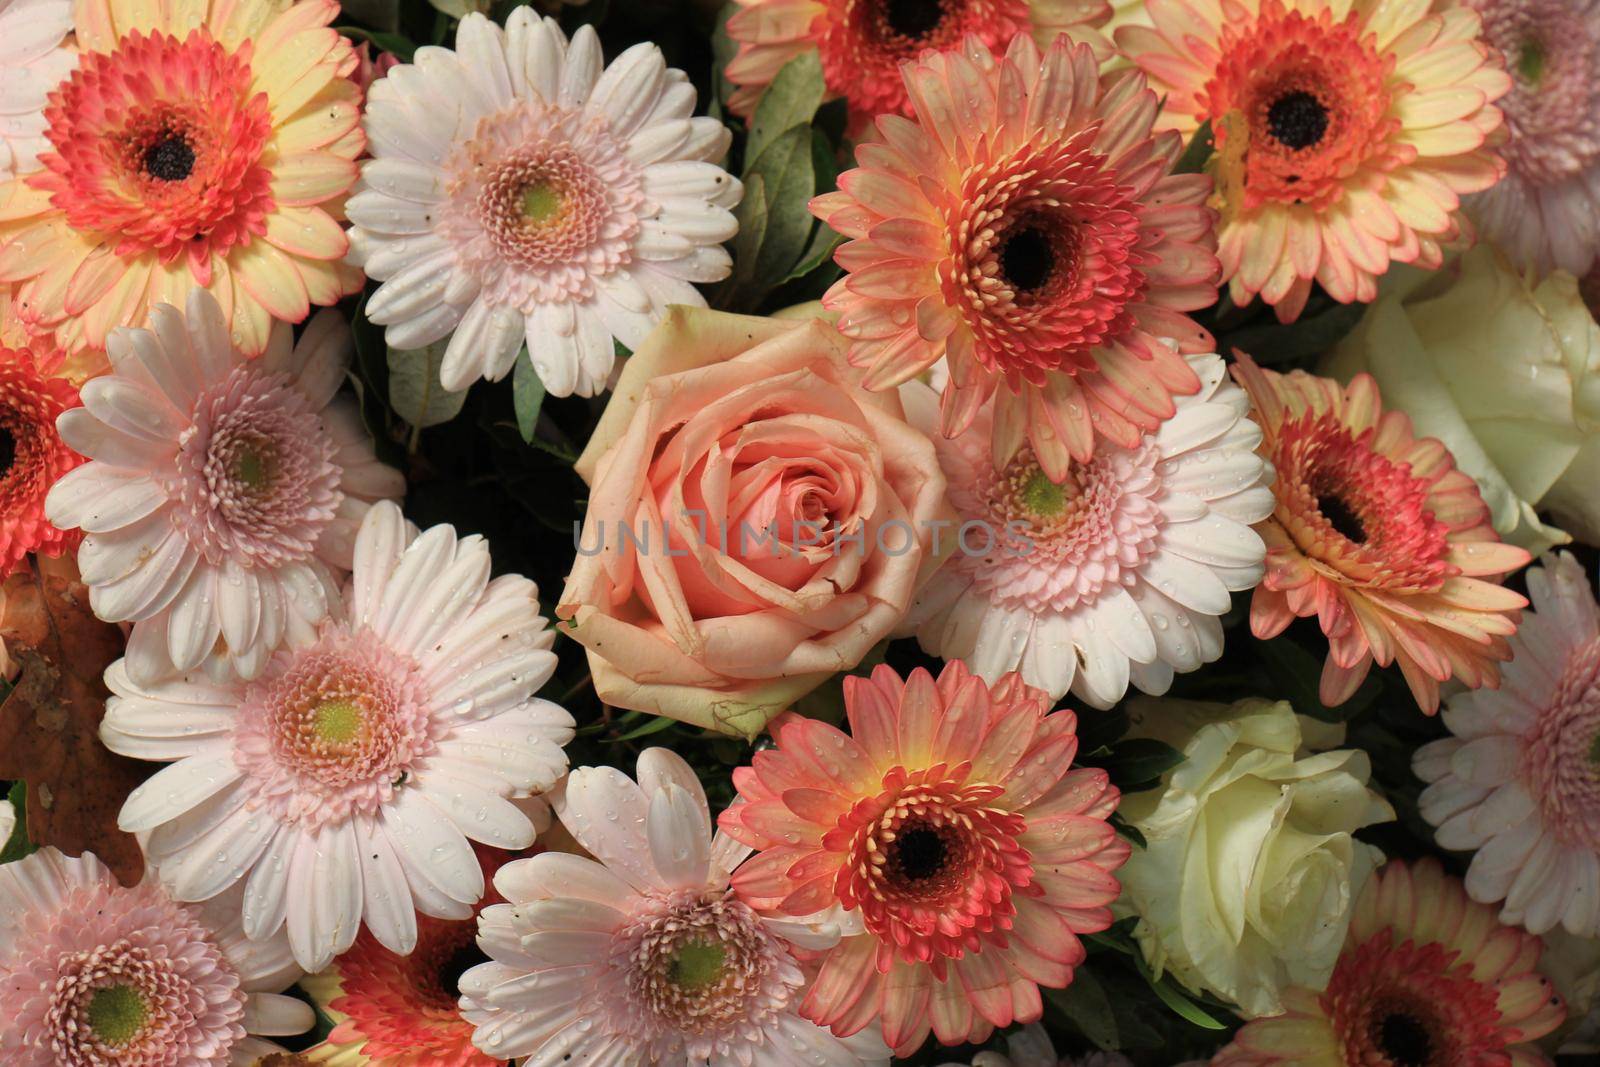 Wedding arrangement in shades of pink and orange, roses and gerbers